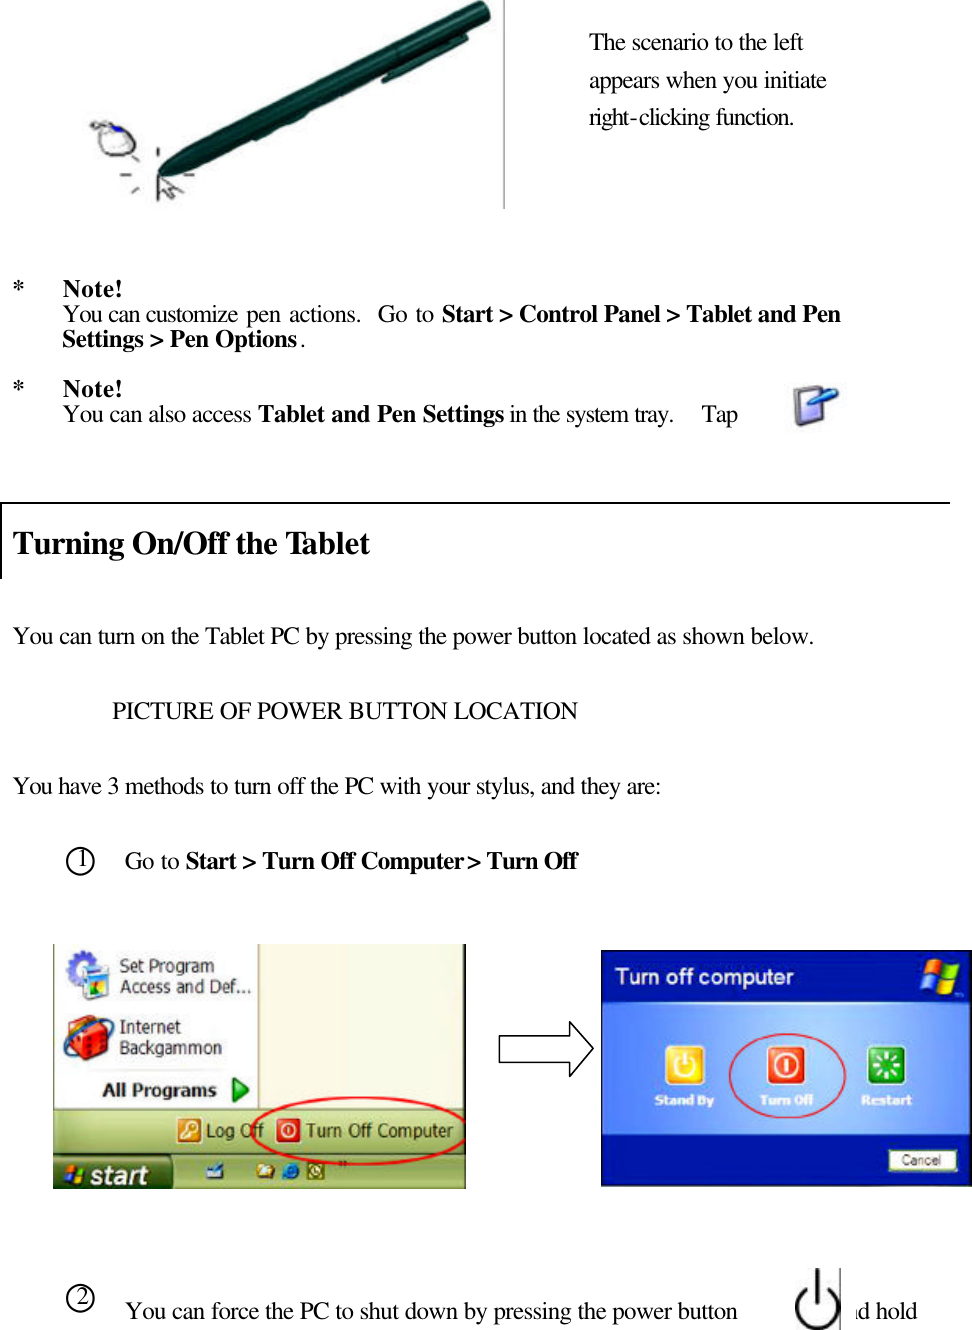            *   Note! You can customize pen actions.  Go to Start &gt; Control Panel &gt; Tablet and Pen Settings &gt; Pen Options.    *   Note! You can also access Tablet and Pen Settings in the system tray.  Tap   Turning On/Off the Tablet    You can turn on the Tablet PC by pressing the power button located as shown below.    PICTURE OF POWER BUTTON LOCATION  You have 3 methods to turn off the PC with your stylus, and they are:  Go to Start &gt; Turn Off Computer &gt; Turn Off            You can force the PC to shut down by pressing the power button        and hold The scenario to the left appears when you initiate right-clicking function. ○1 ○2   